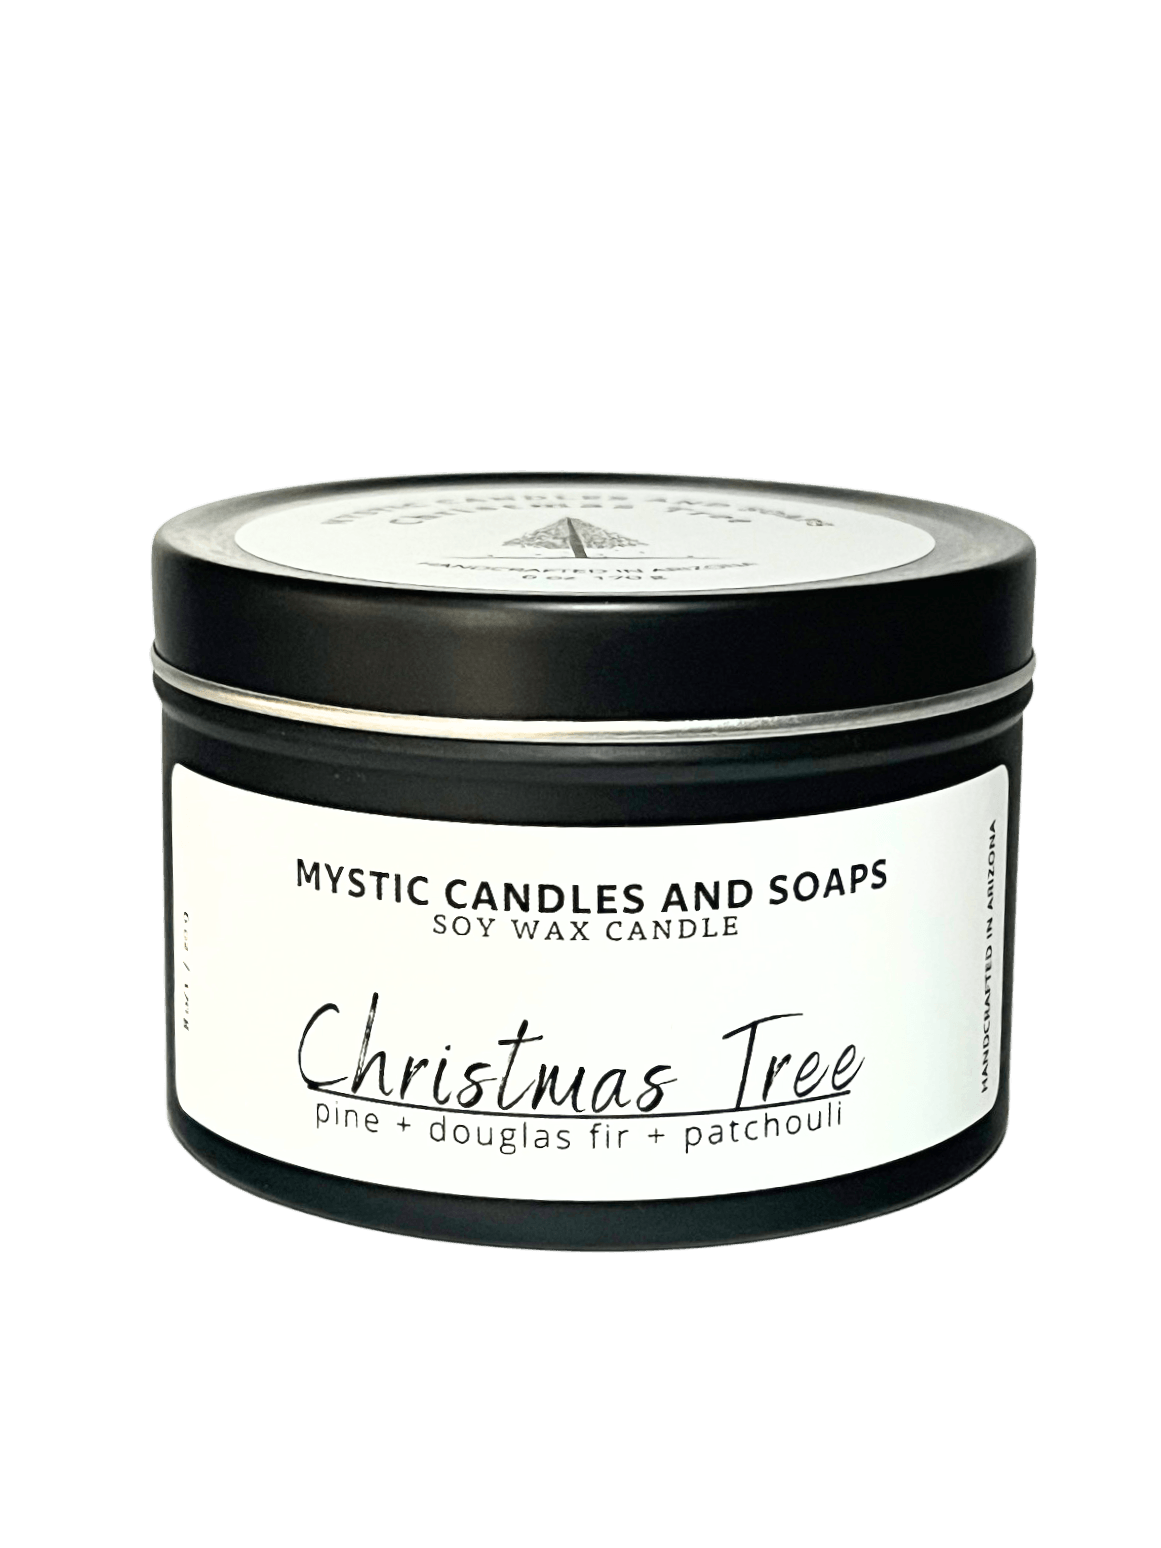 Christmas Tree Candle - Mystic Candles and Soaps LLC